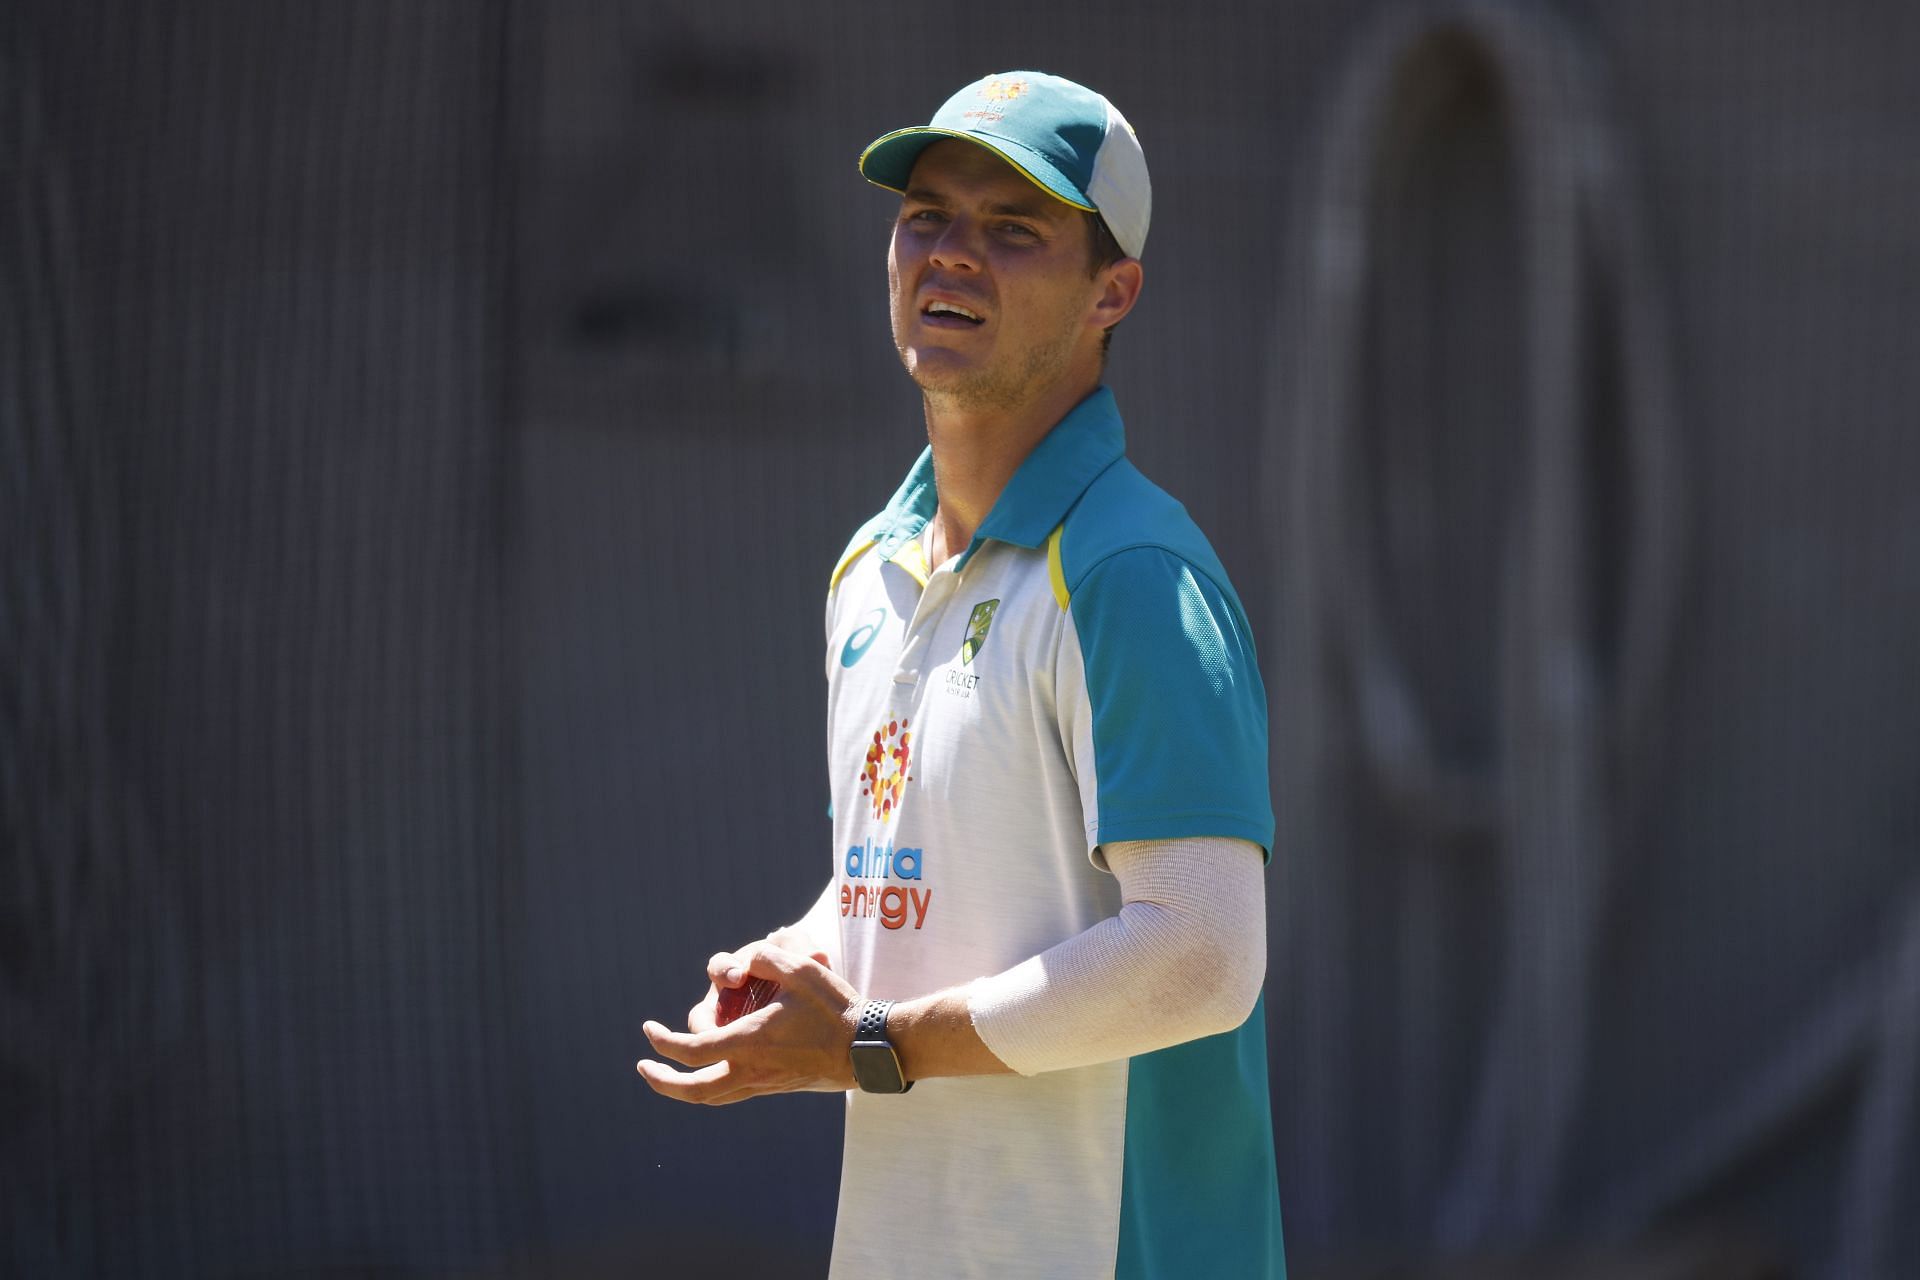 PAK vs AUS: Mitchell Swepson replaces injured Steve Smith for white-ball series in Pakistan